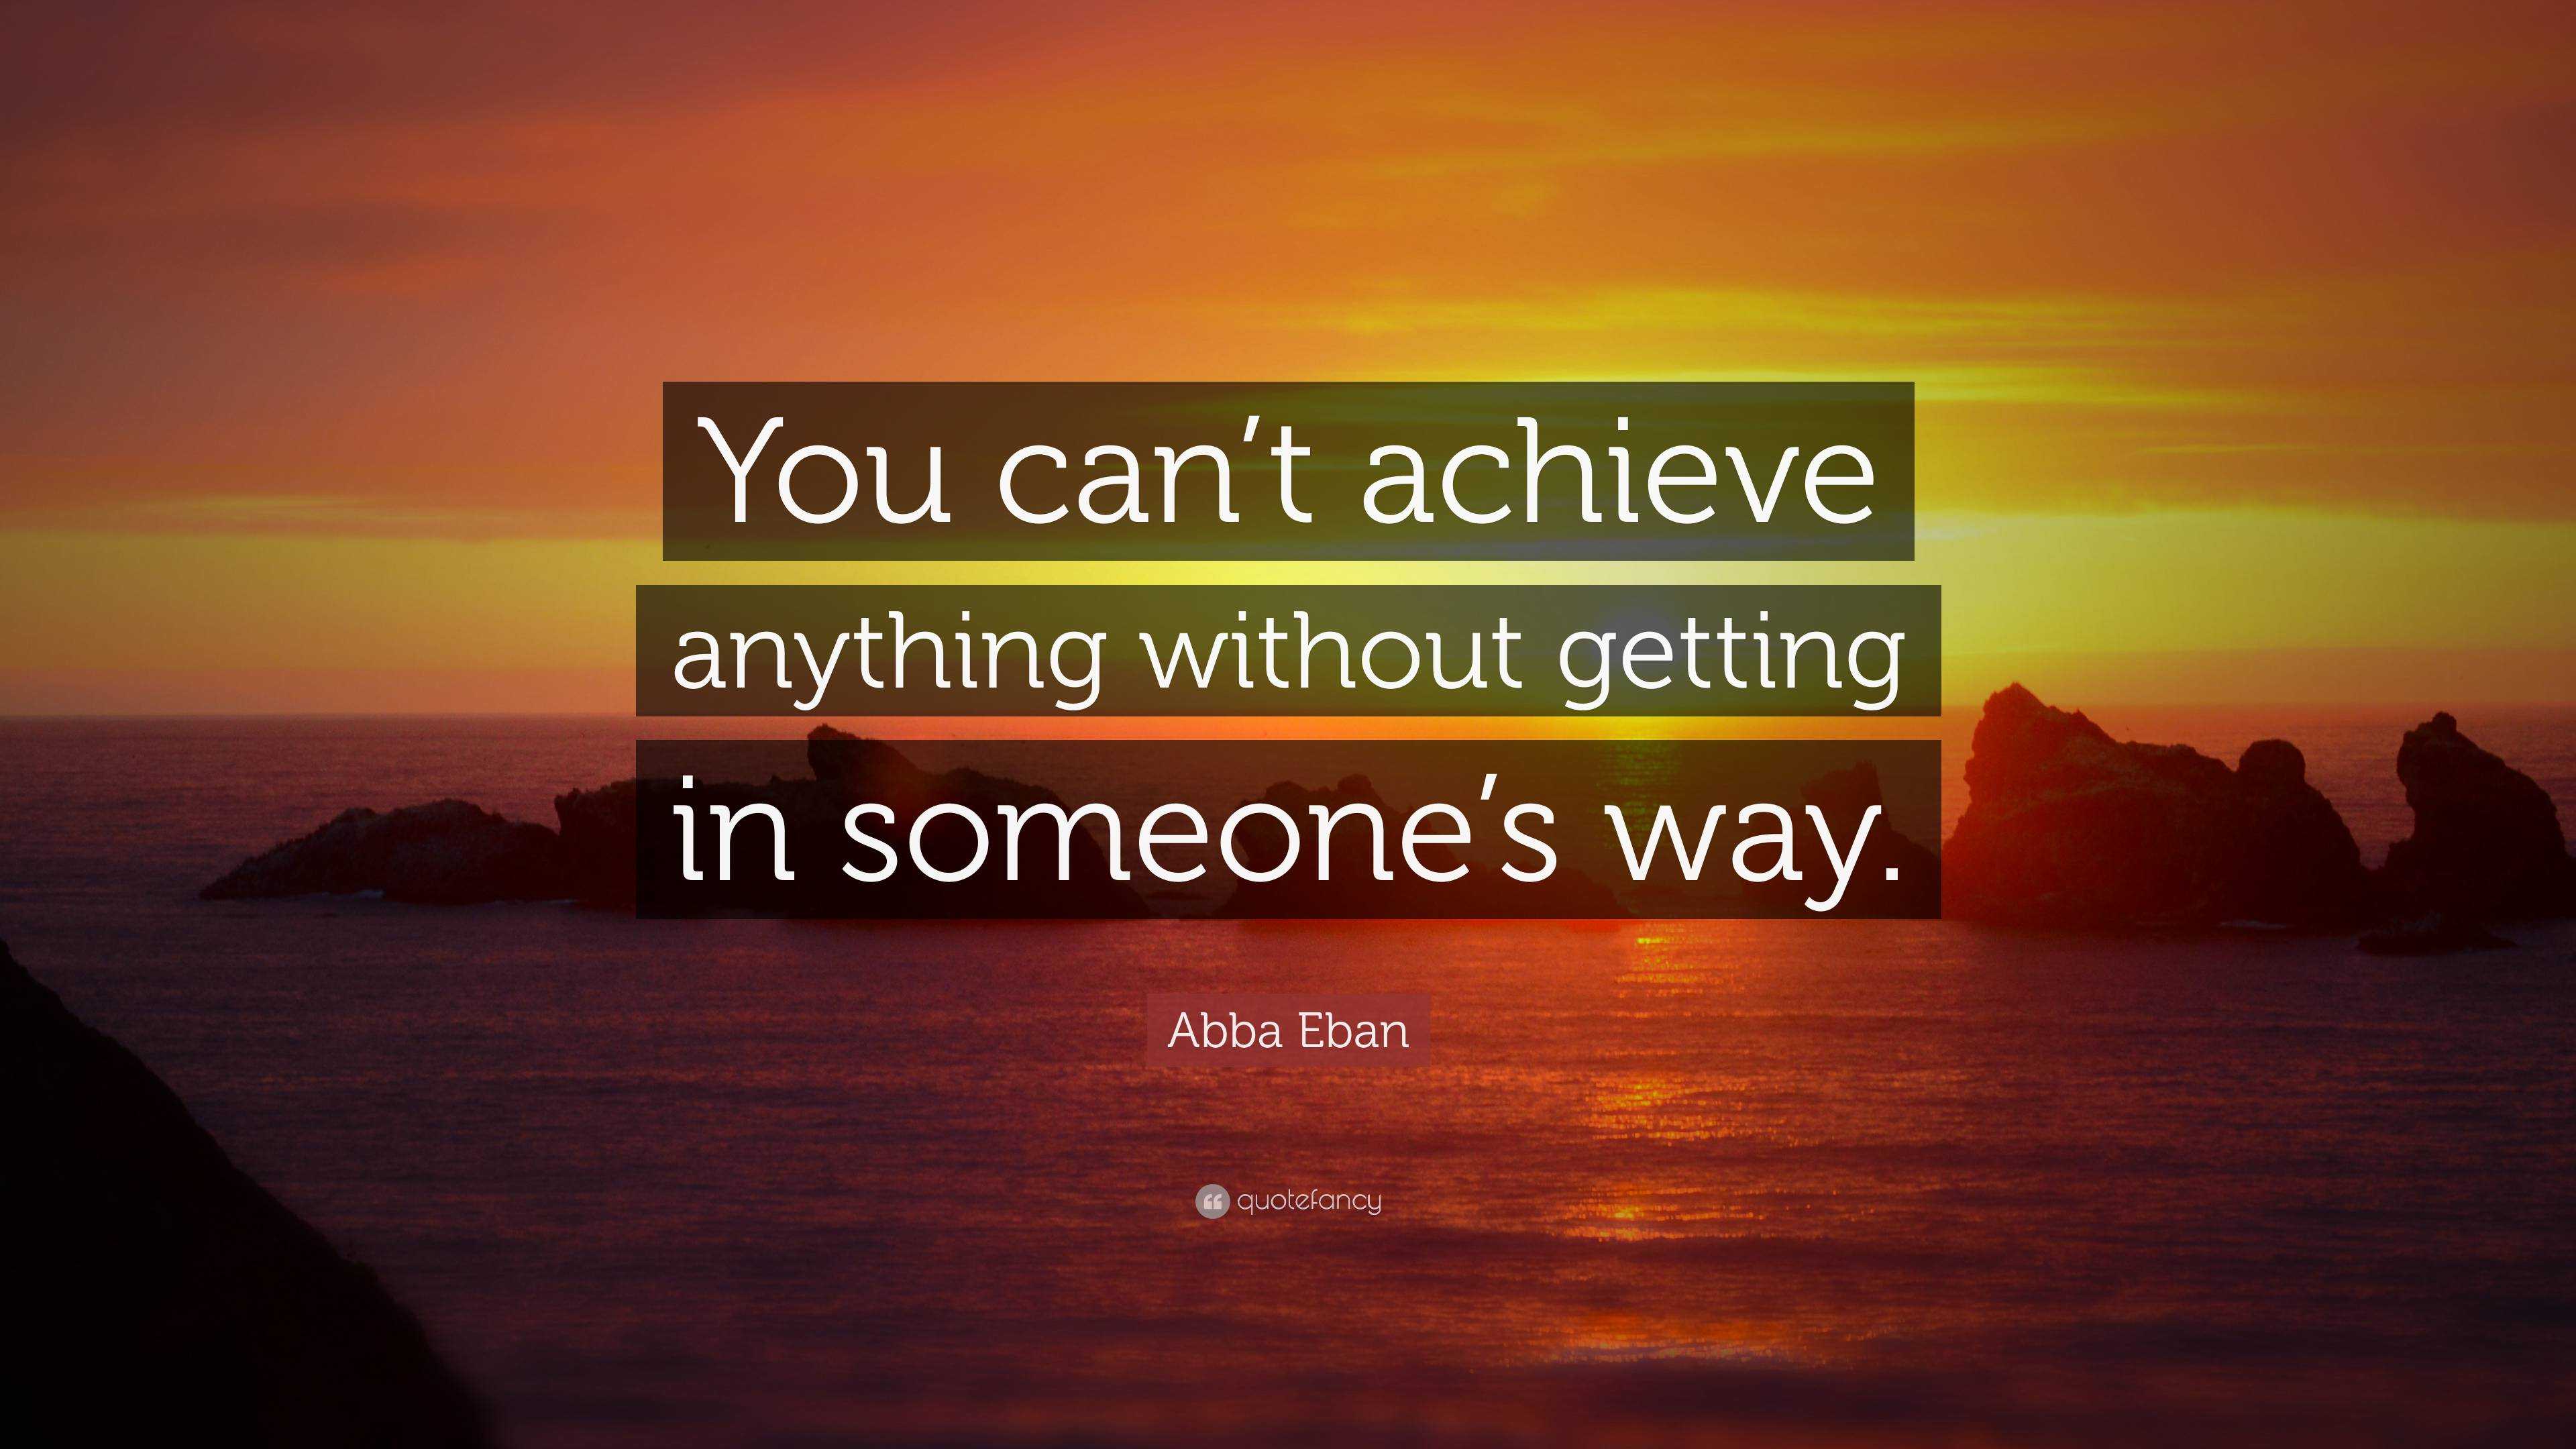 Abba Eban Quote: “You can’t achieve anything without getting in someone ...